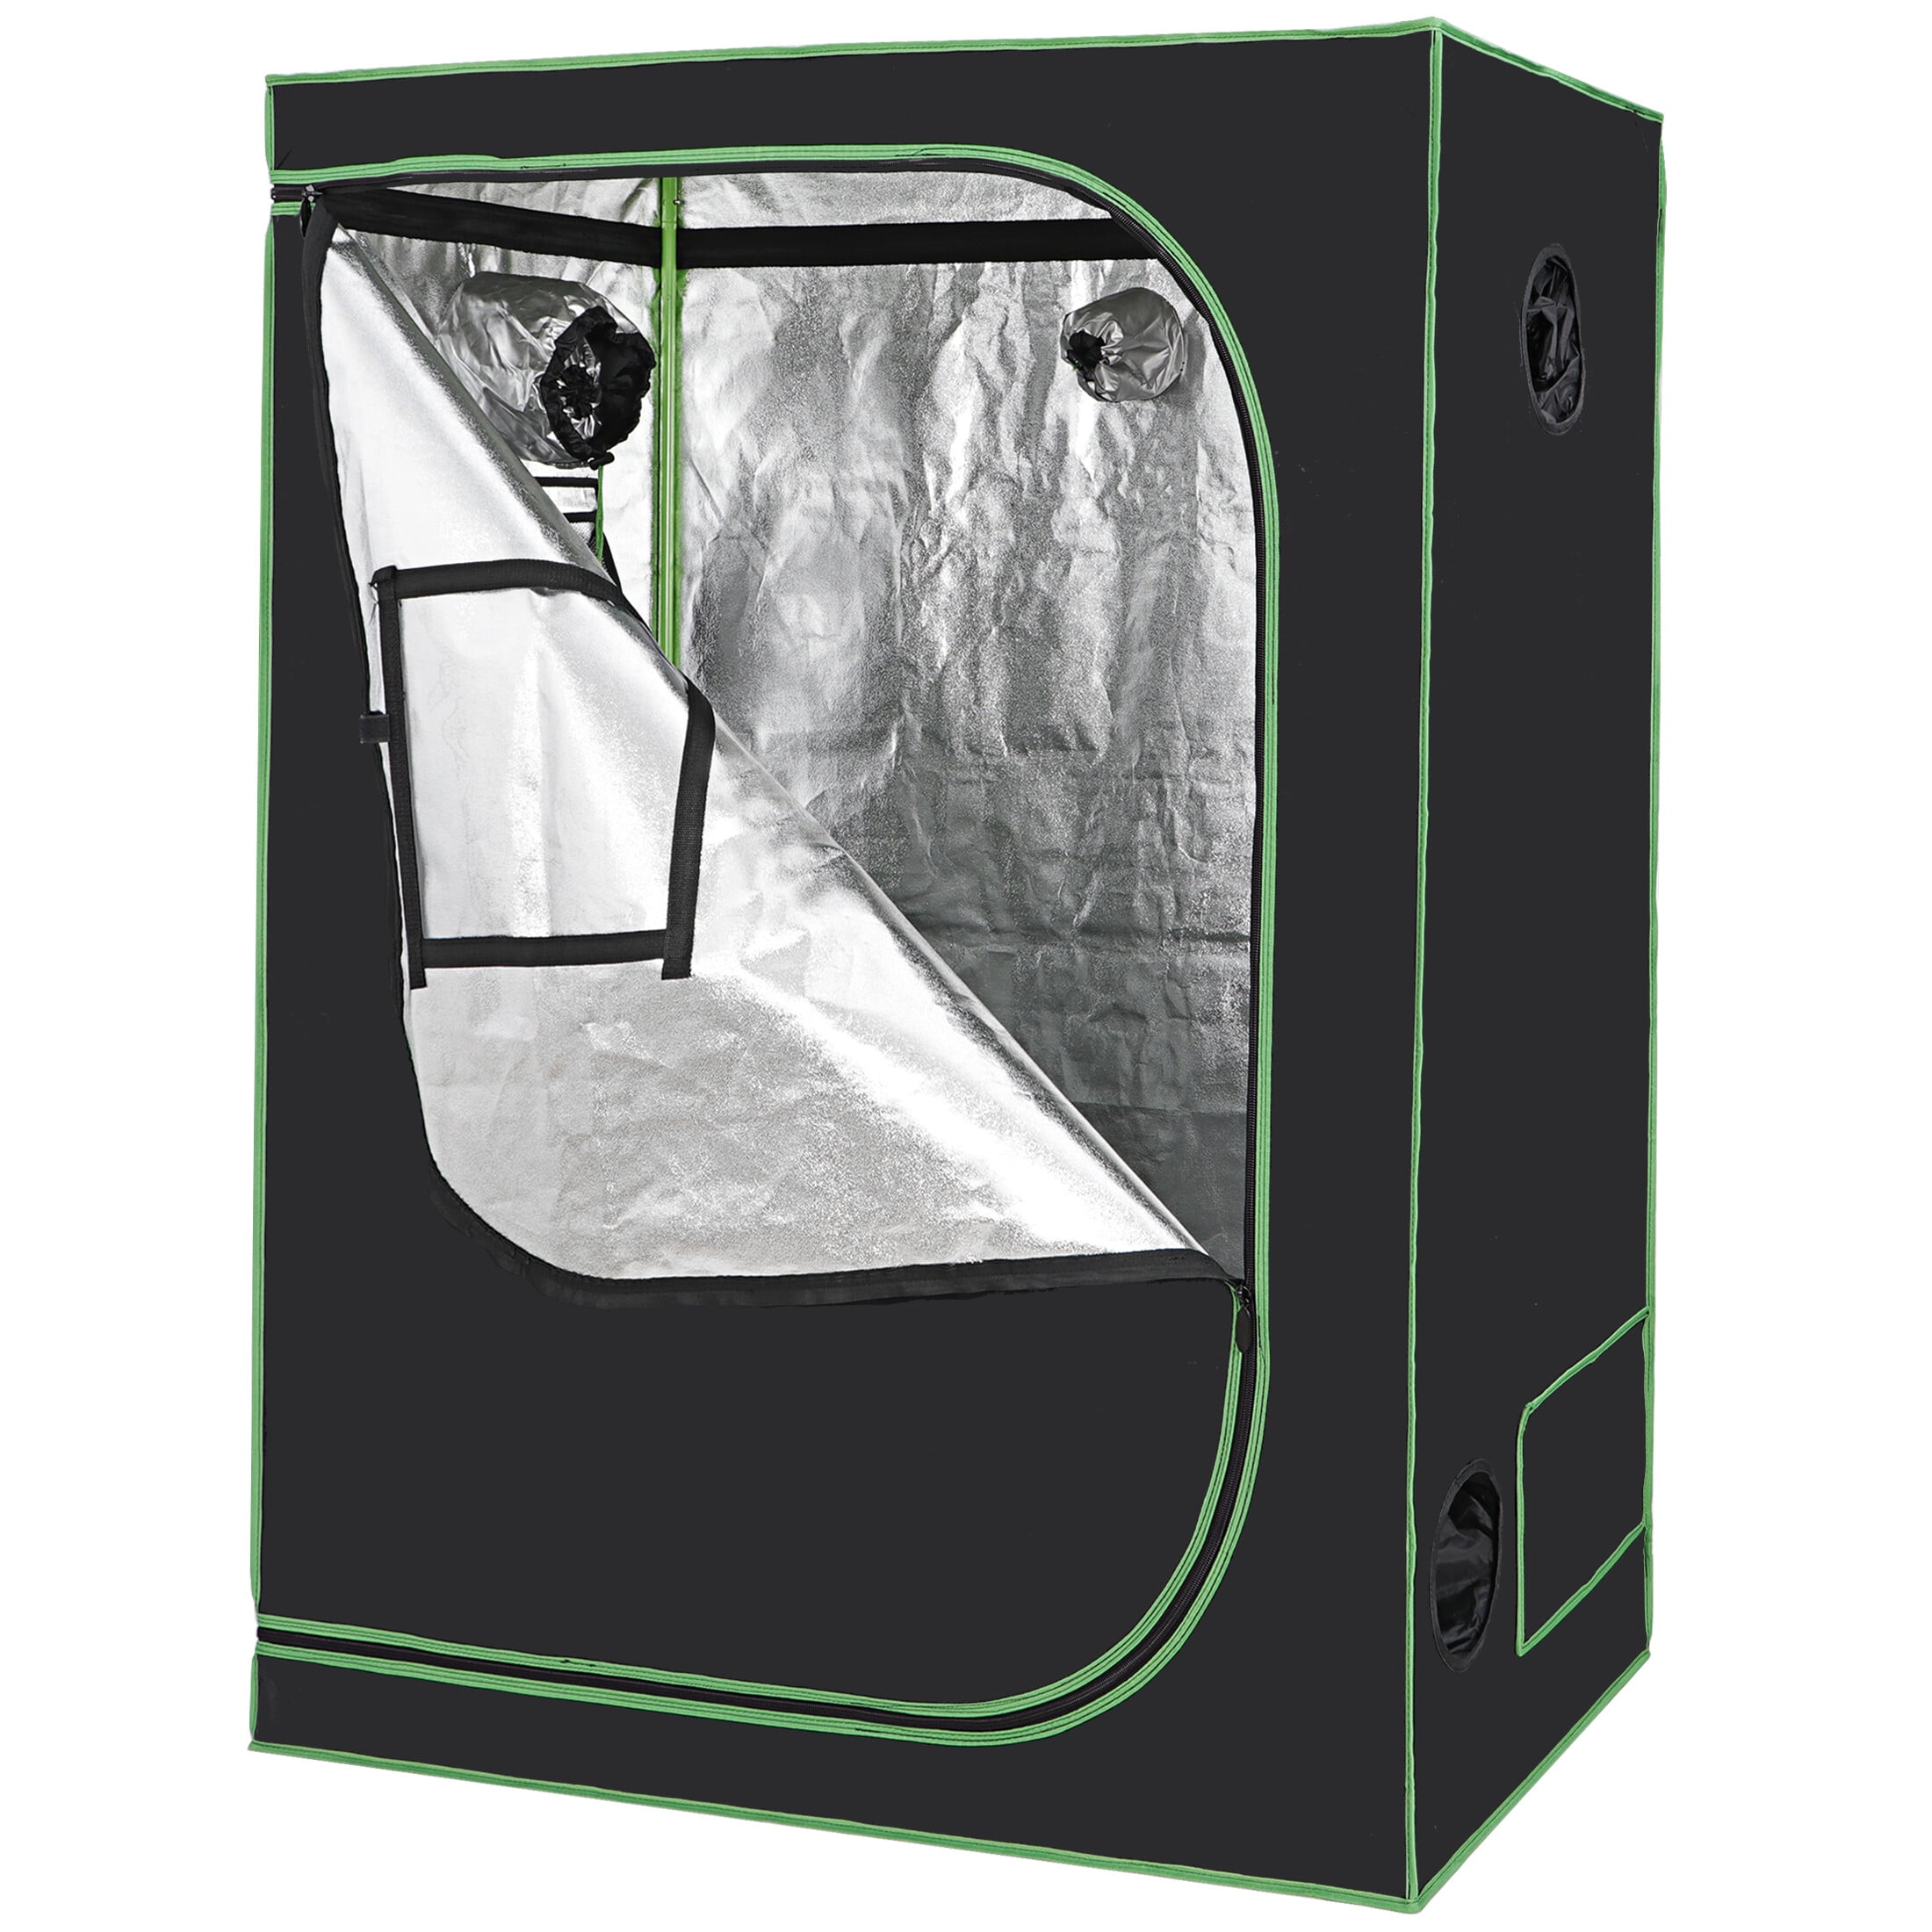 SunStream Hydroponic Grow Tent 24"x24"x48" for Indoor Seedling Plant Growing